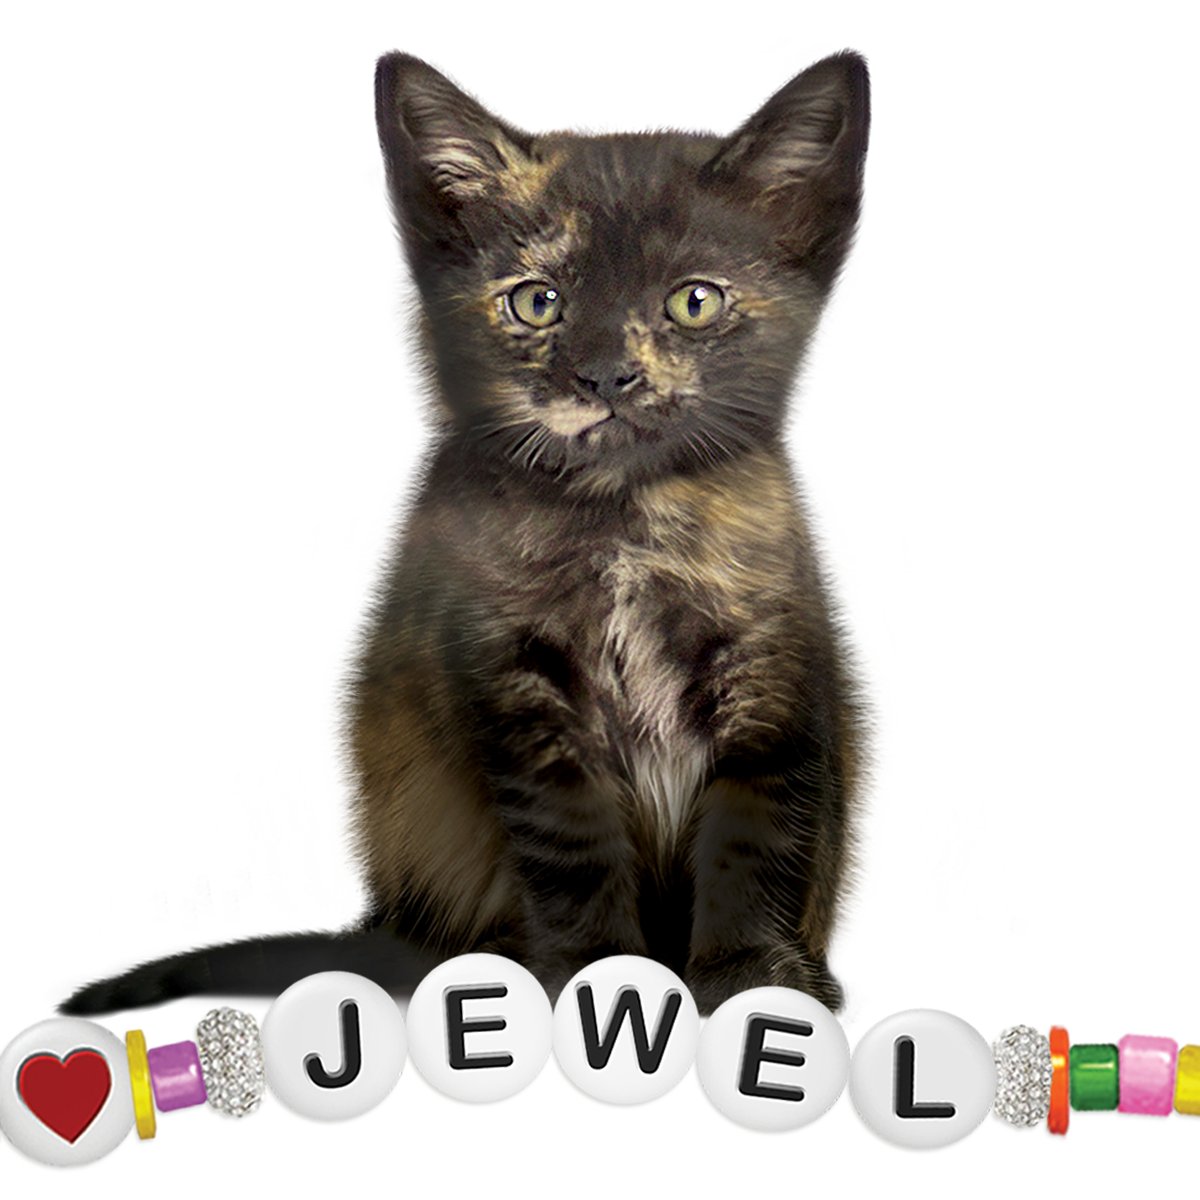 Ready to welcome a little sparkle into your life? Jewel, along with her sister & brother, will be available for adoption at the Humane Society of Truckee-Tahoe on Giving Tuesday, 5/14/2024, at 10am.
givingtuesday@hstt.org.
#taylorswift 
#erastour 
#adopttahoepets 
@taylorswift